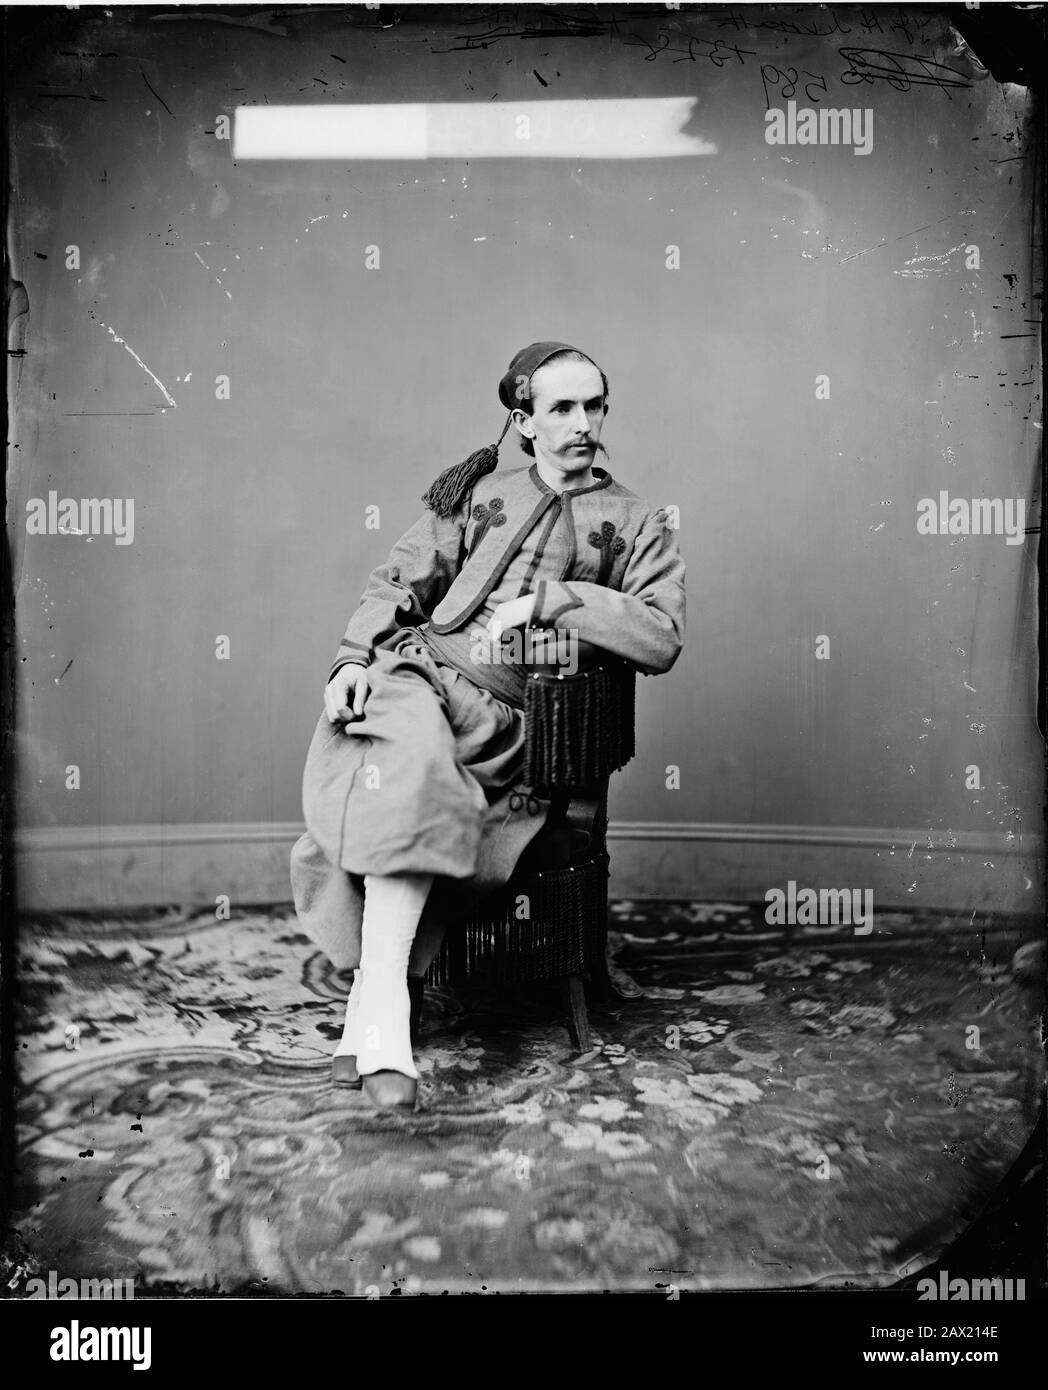 1868, USA : JOHN H. SURRATT Jr ( 1844 - 1916 ) dressed like in Papal Zouave uniform   . Son of MARY SURRATT ( 1820 - 1865 ) the woman reputed one of  U.S.A. President ABRAHAM LINCOLN ( 1809 - 1865 ) conspirators and sentenced to death by hanging . Photographed by Matthew Brady of Brady & Co. John Harrison Surratt  Jr. avoided arrest immediately after the assassination by fleeing the country. He served briefly as a Papal Zouave in ITALY before his arrest and extradition. By the time he returned to the United States the statute of limitations had expired on most of the potential charges and he w Stock Photo